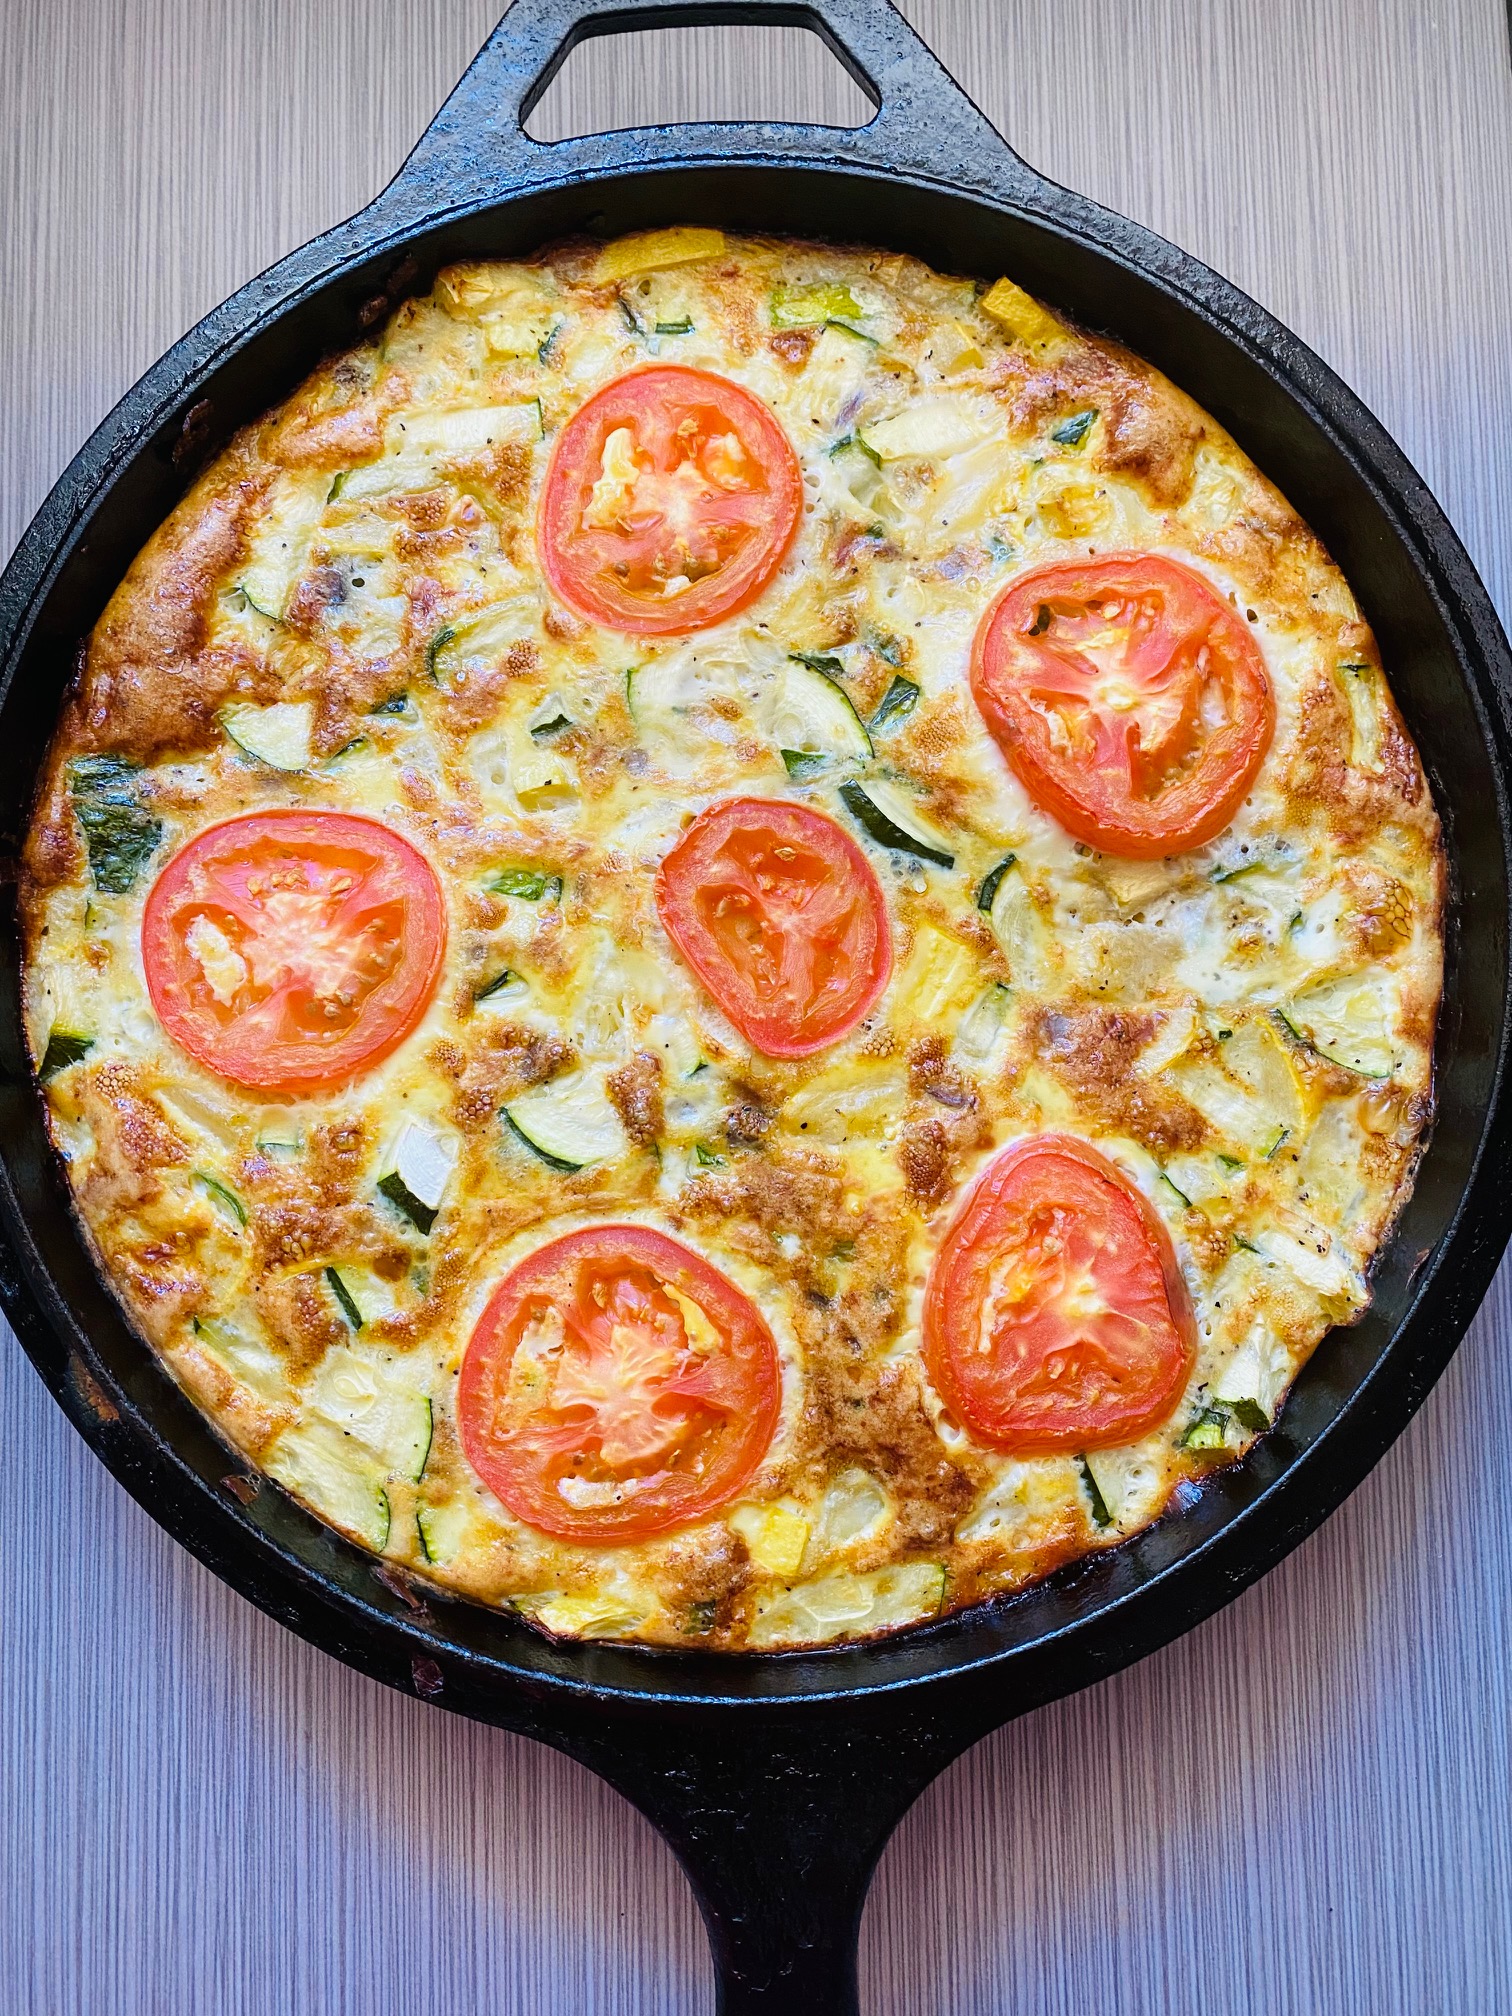 Veggie frittata made with zuchinni, yellow squash, red onion, and eggs, topped with tomato slices in a cast iron pan against a grey tile background.